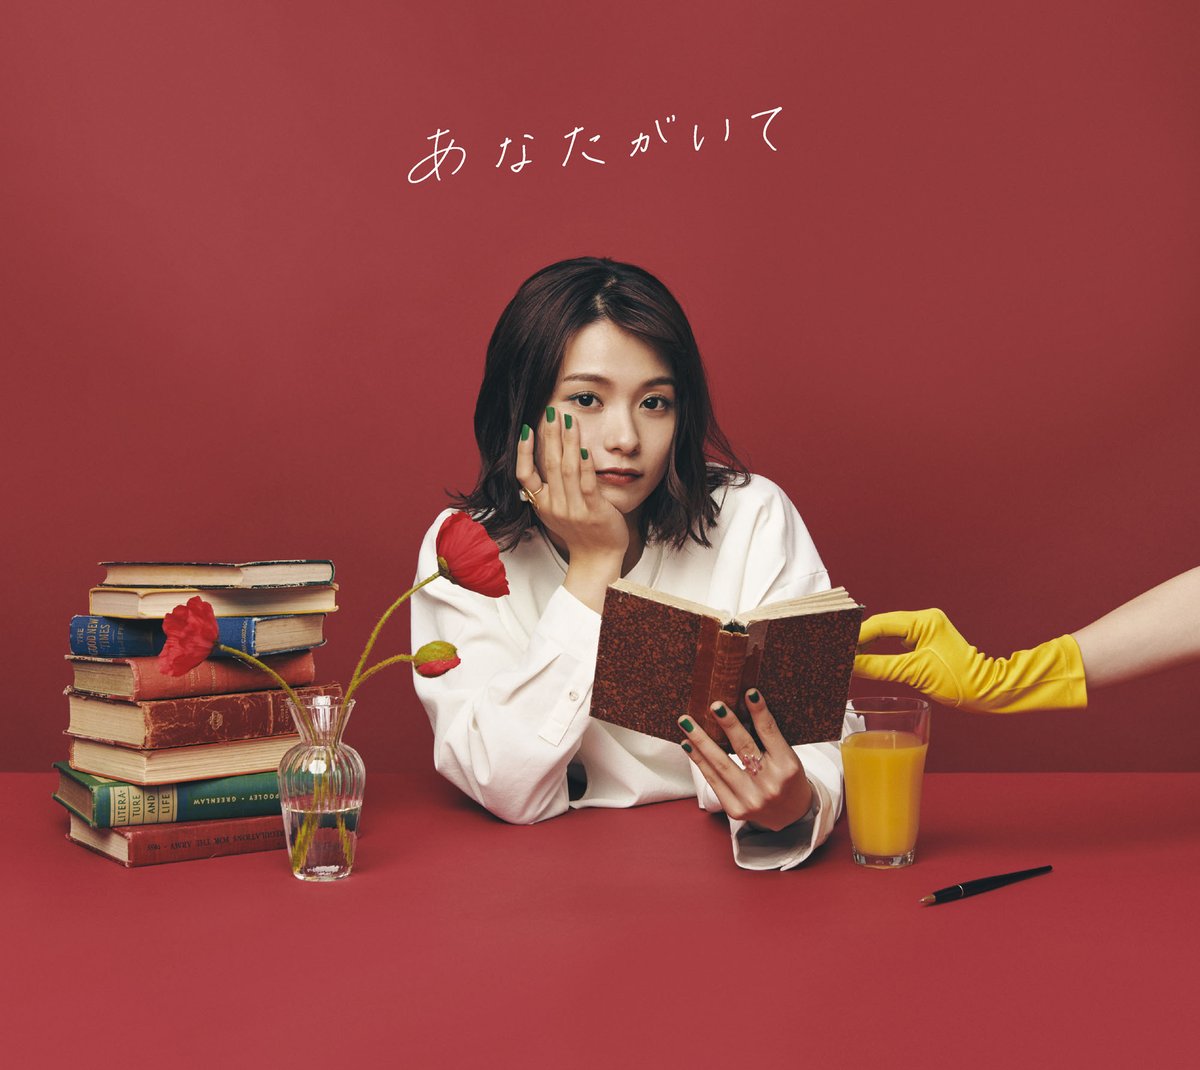 Cover art for『Kana Adachi - 雨の日は』from the release『Anata ga Ite